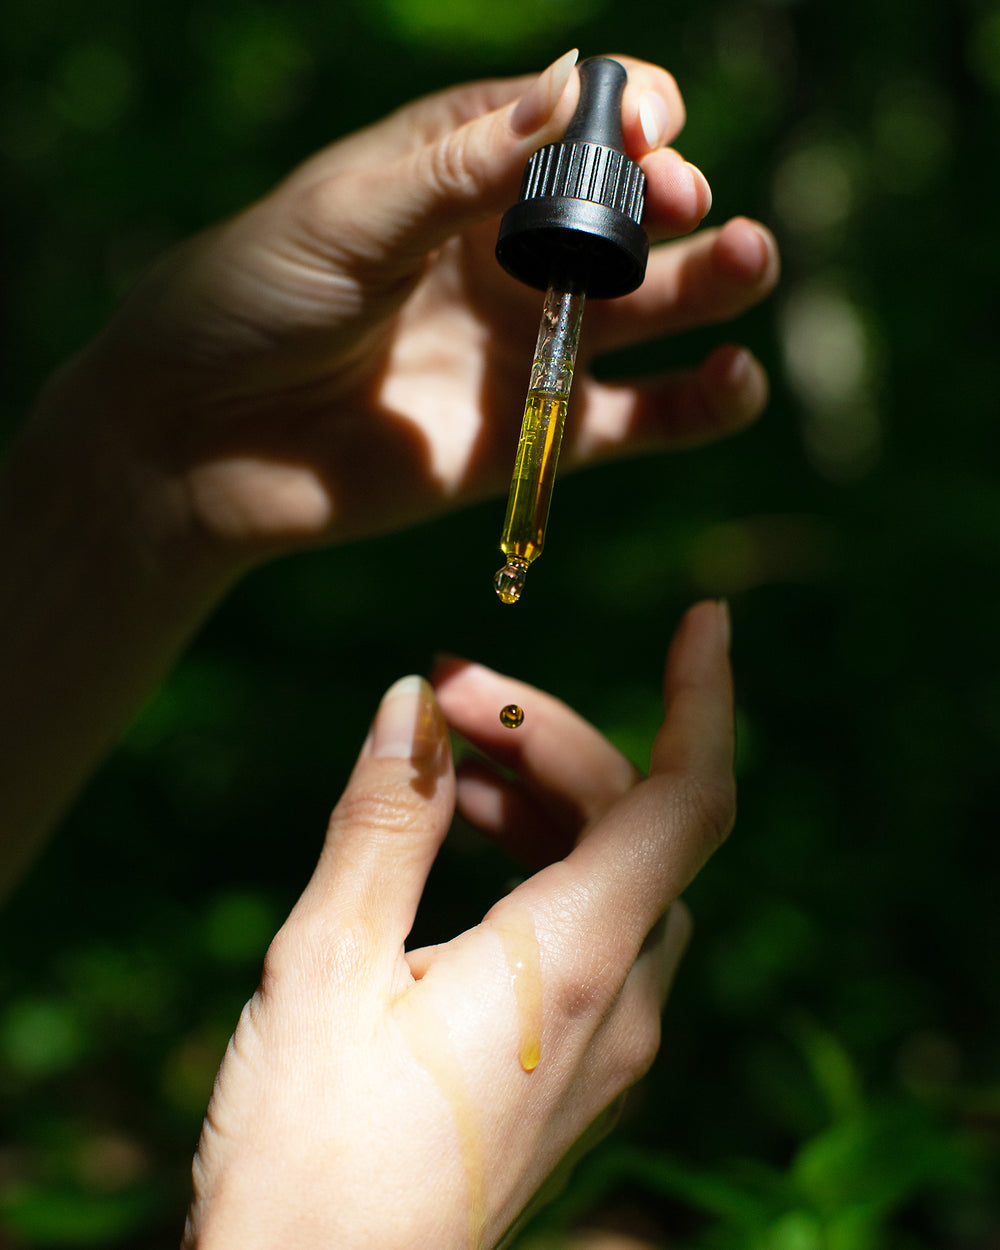 Hand dripping YANA SKINCARE Holy Grail Serum onto another hand, in a forest setting.